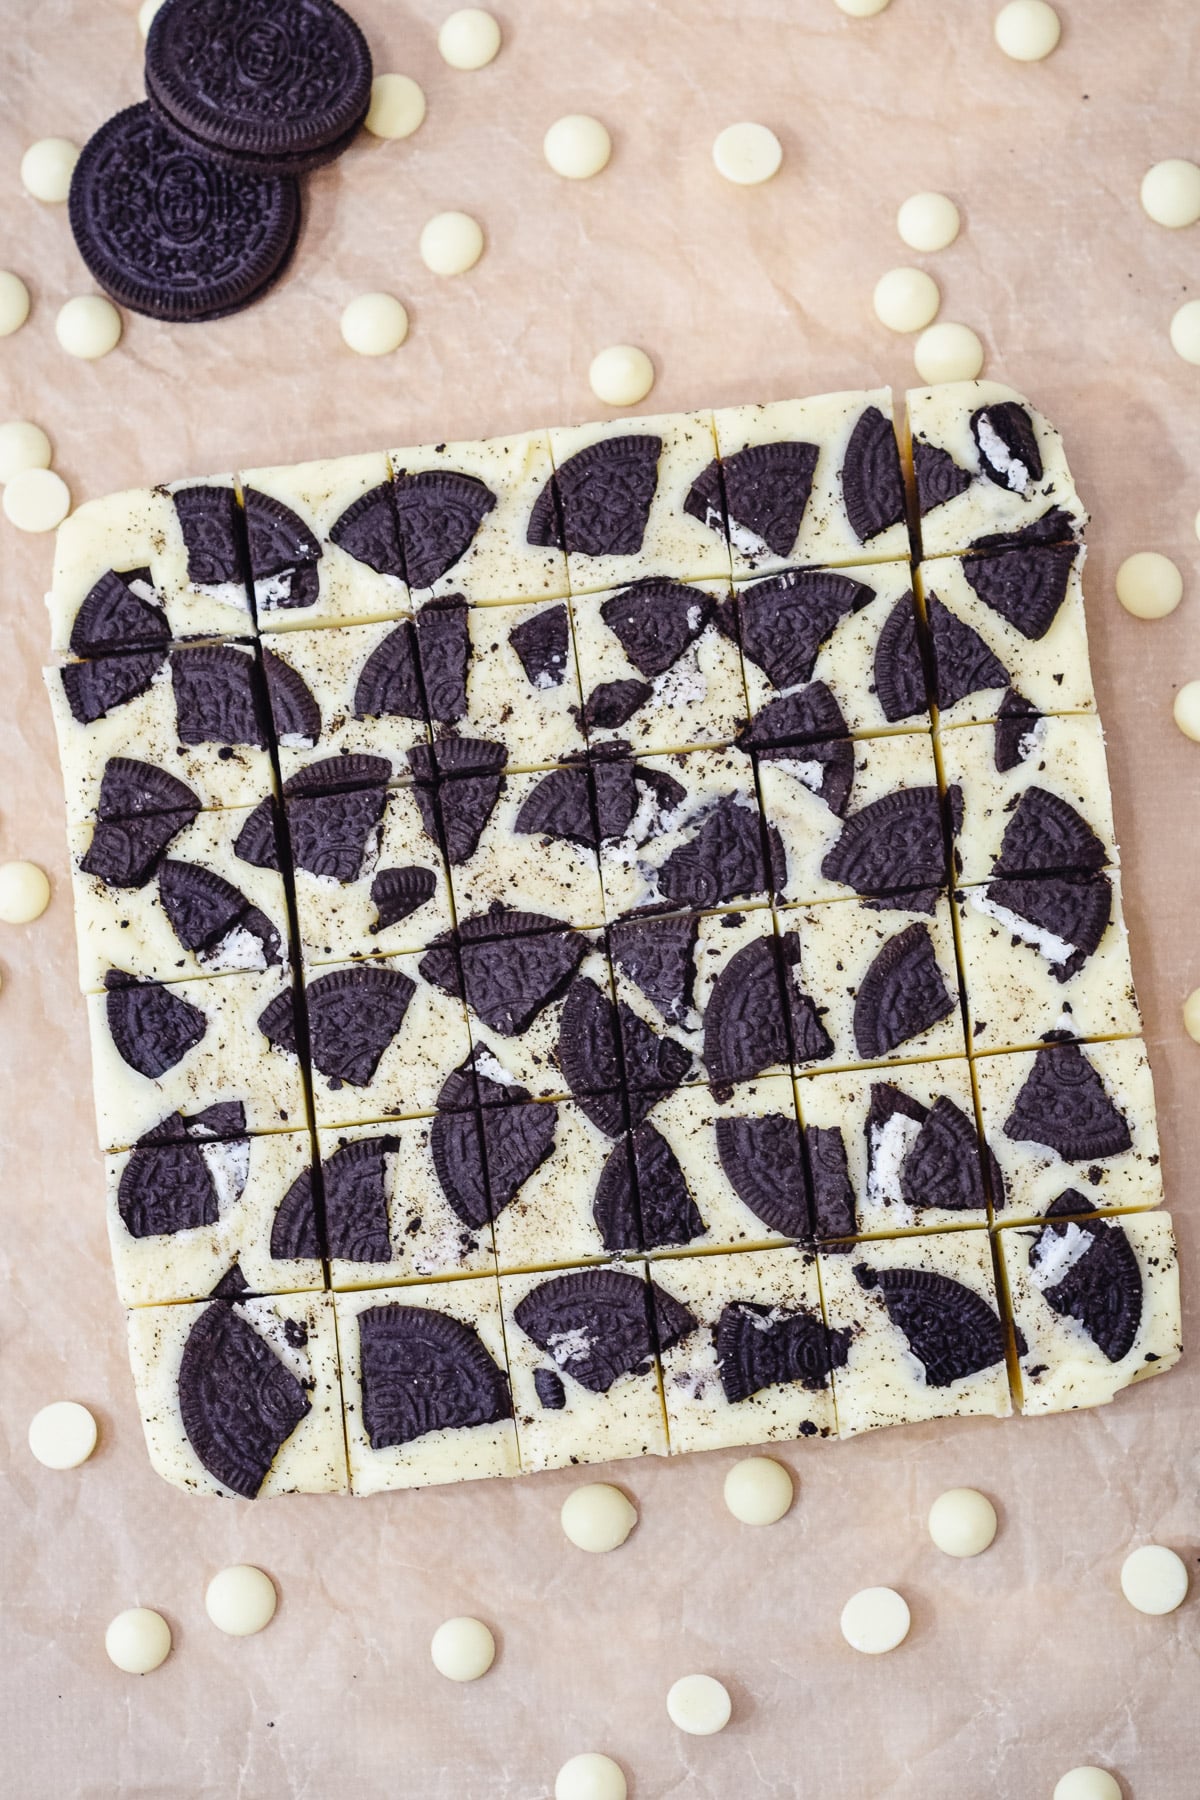 cookies and cream oreo fudge slab with Oreos and white chocolate chips.